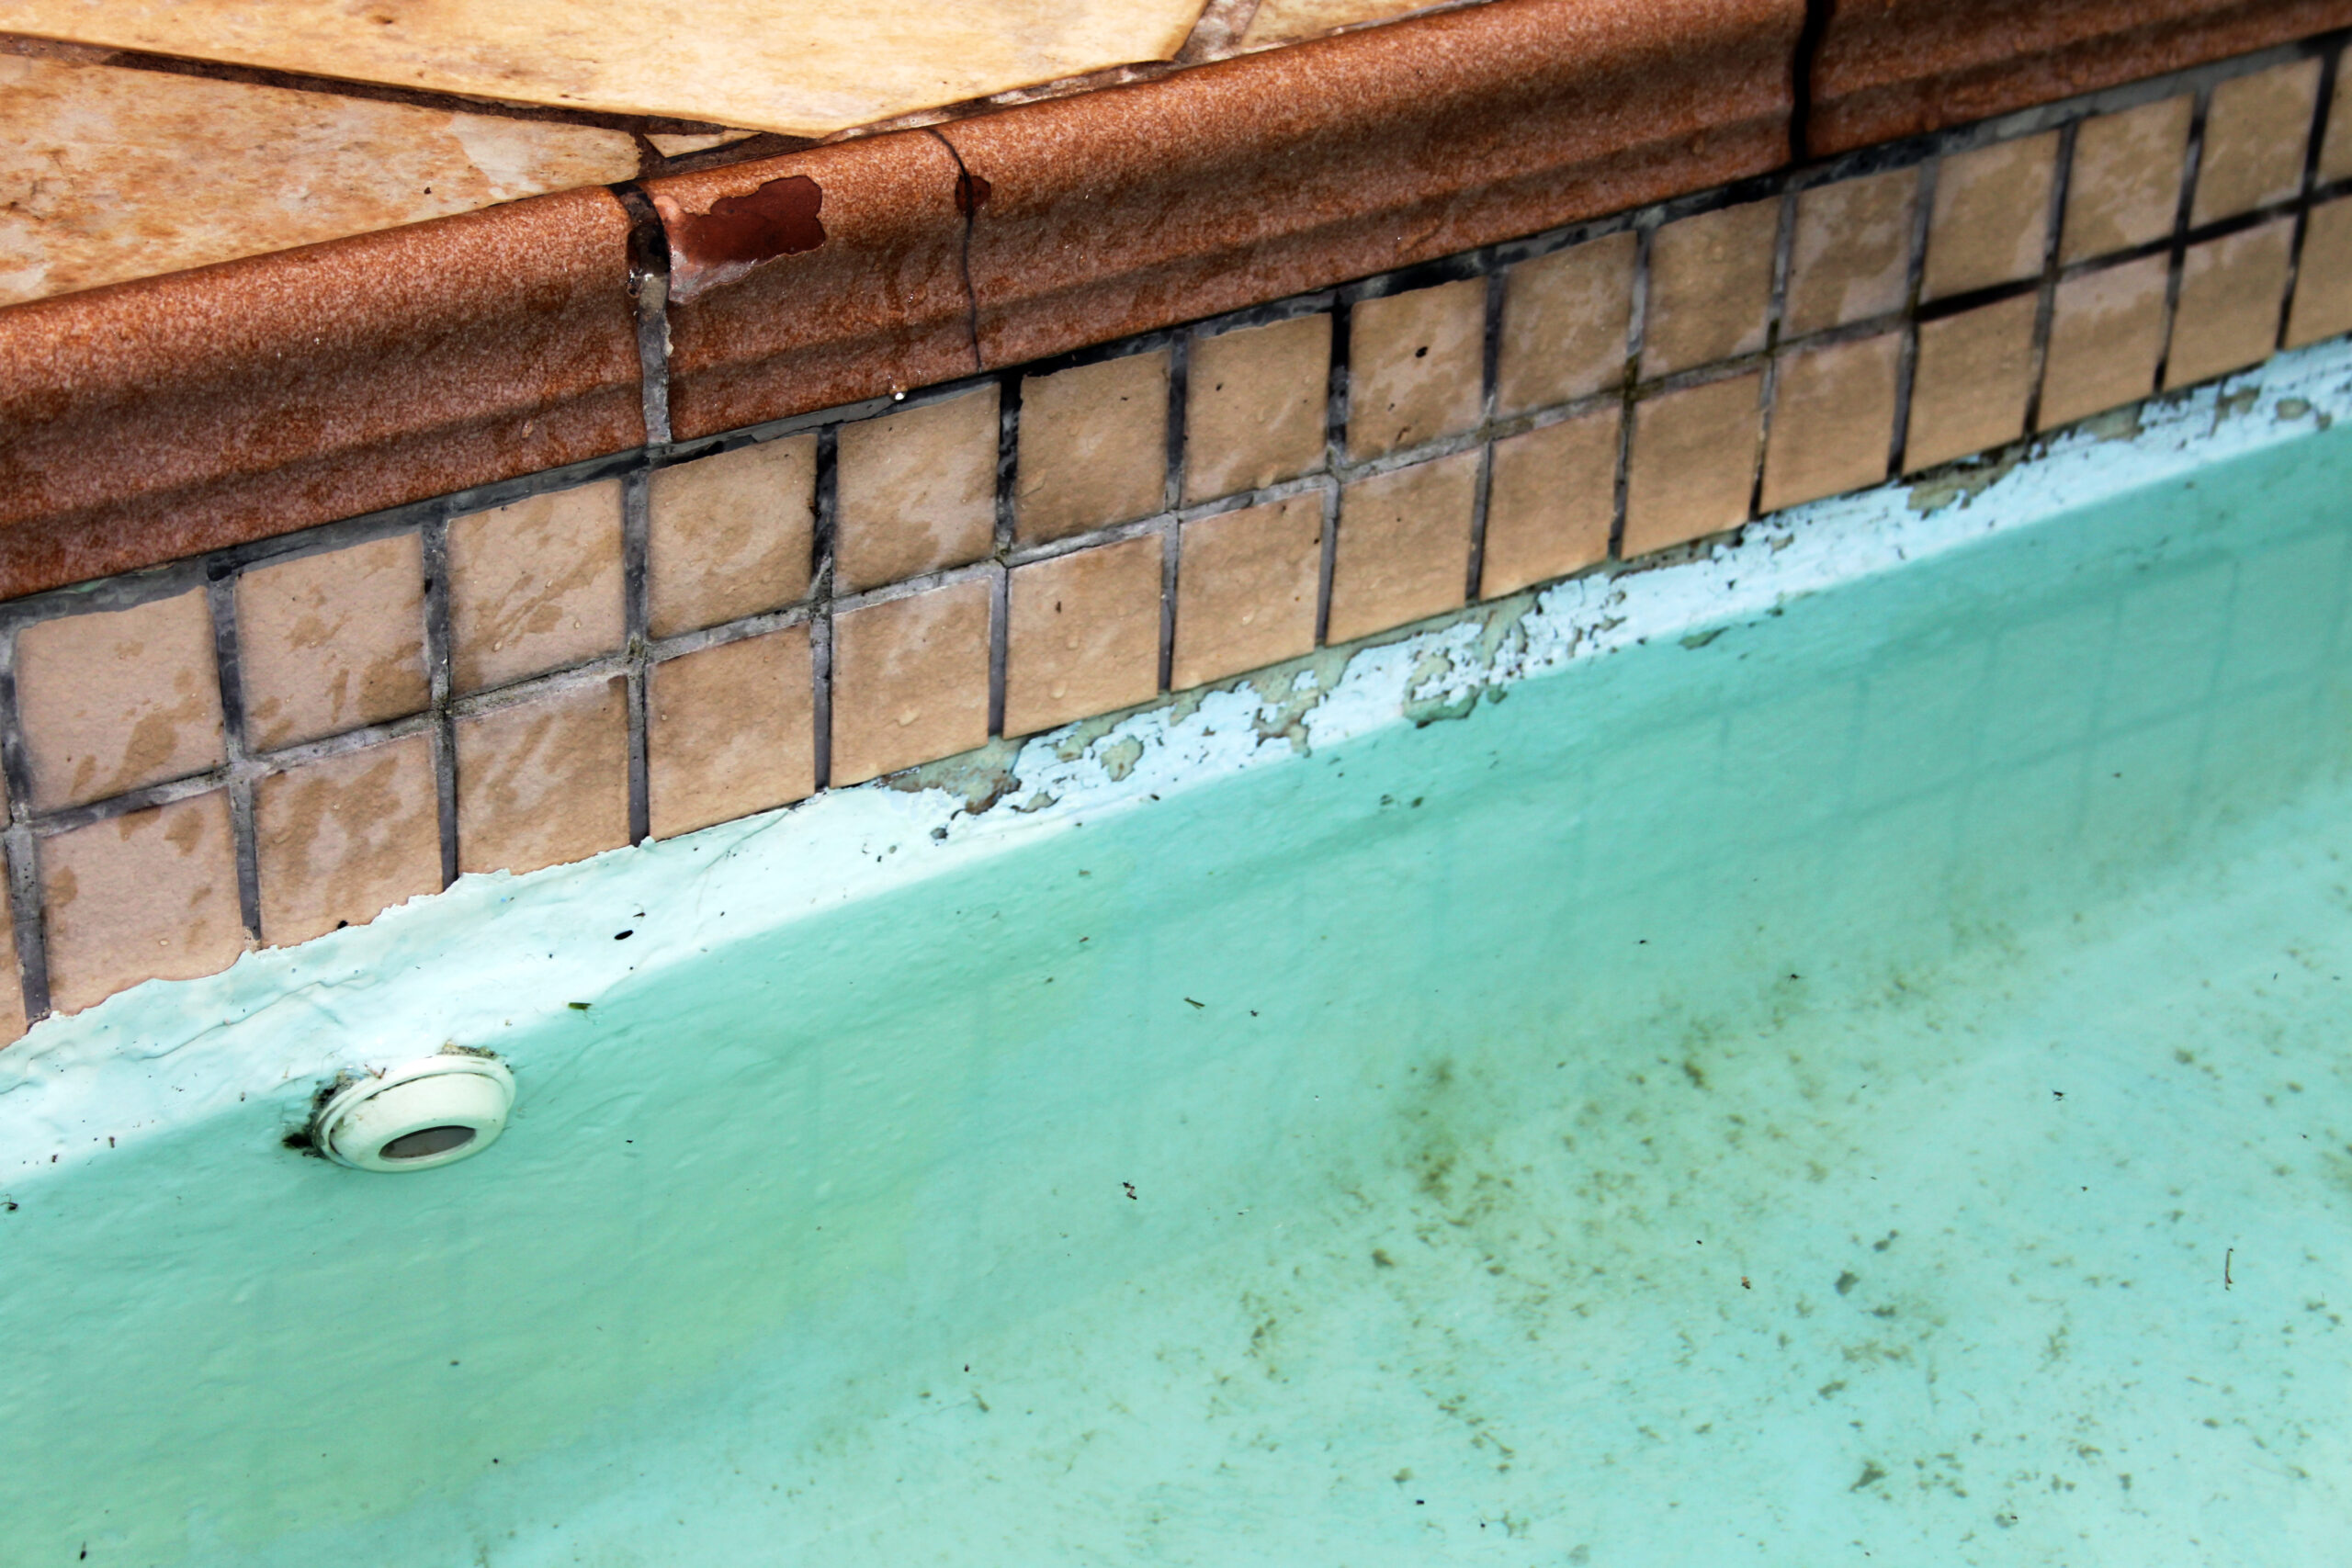 





Pool leakage, a situation in which a swimming pool loses water due to cracks, holes, or other structural issues, potentially leading to water and chemical loss and requiring repair.